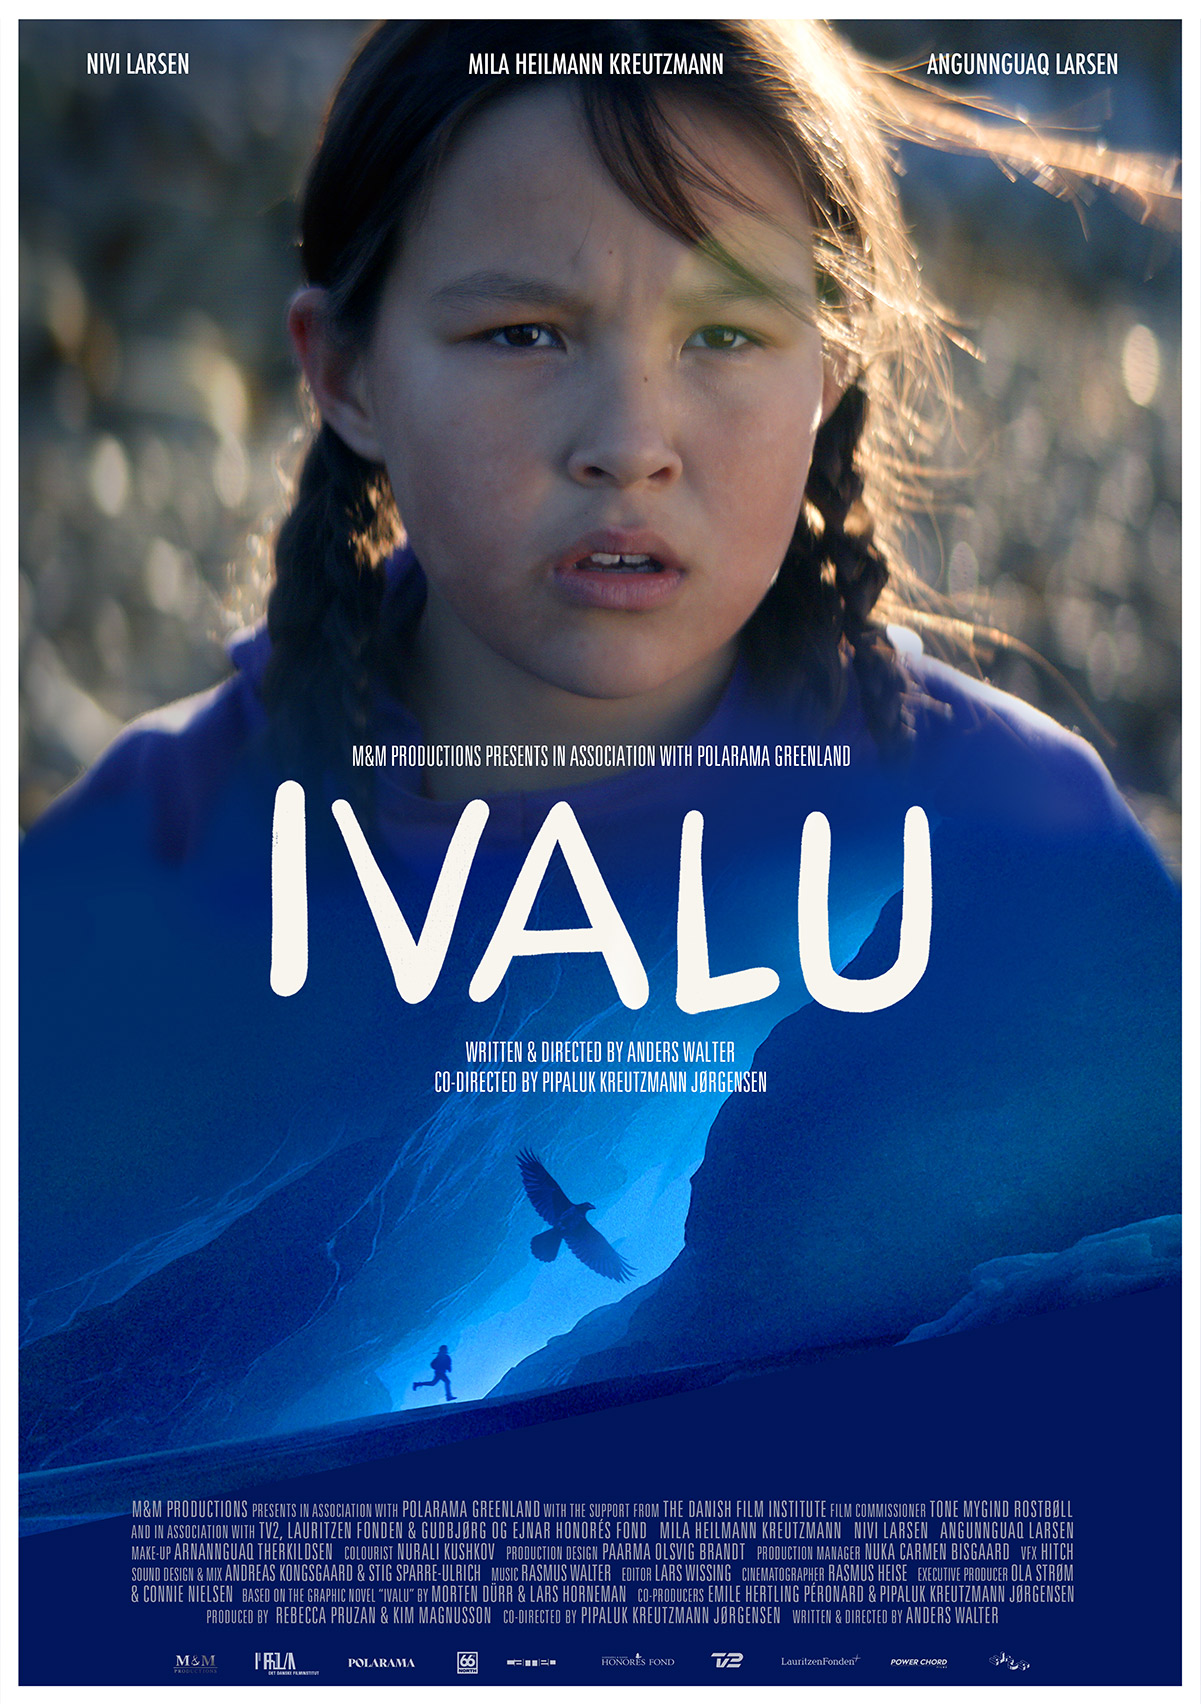 IVALU poster - main_reduced